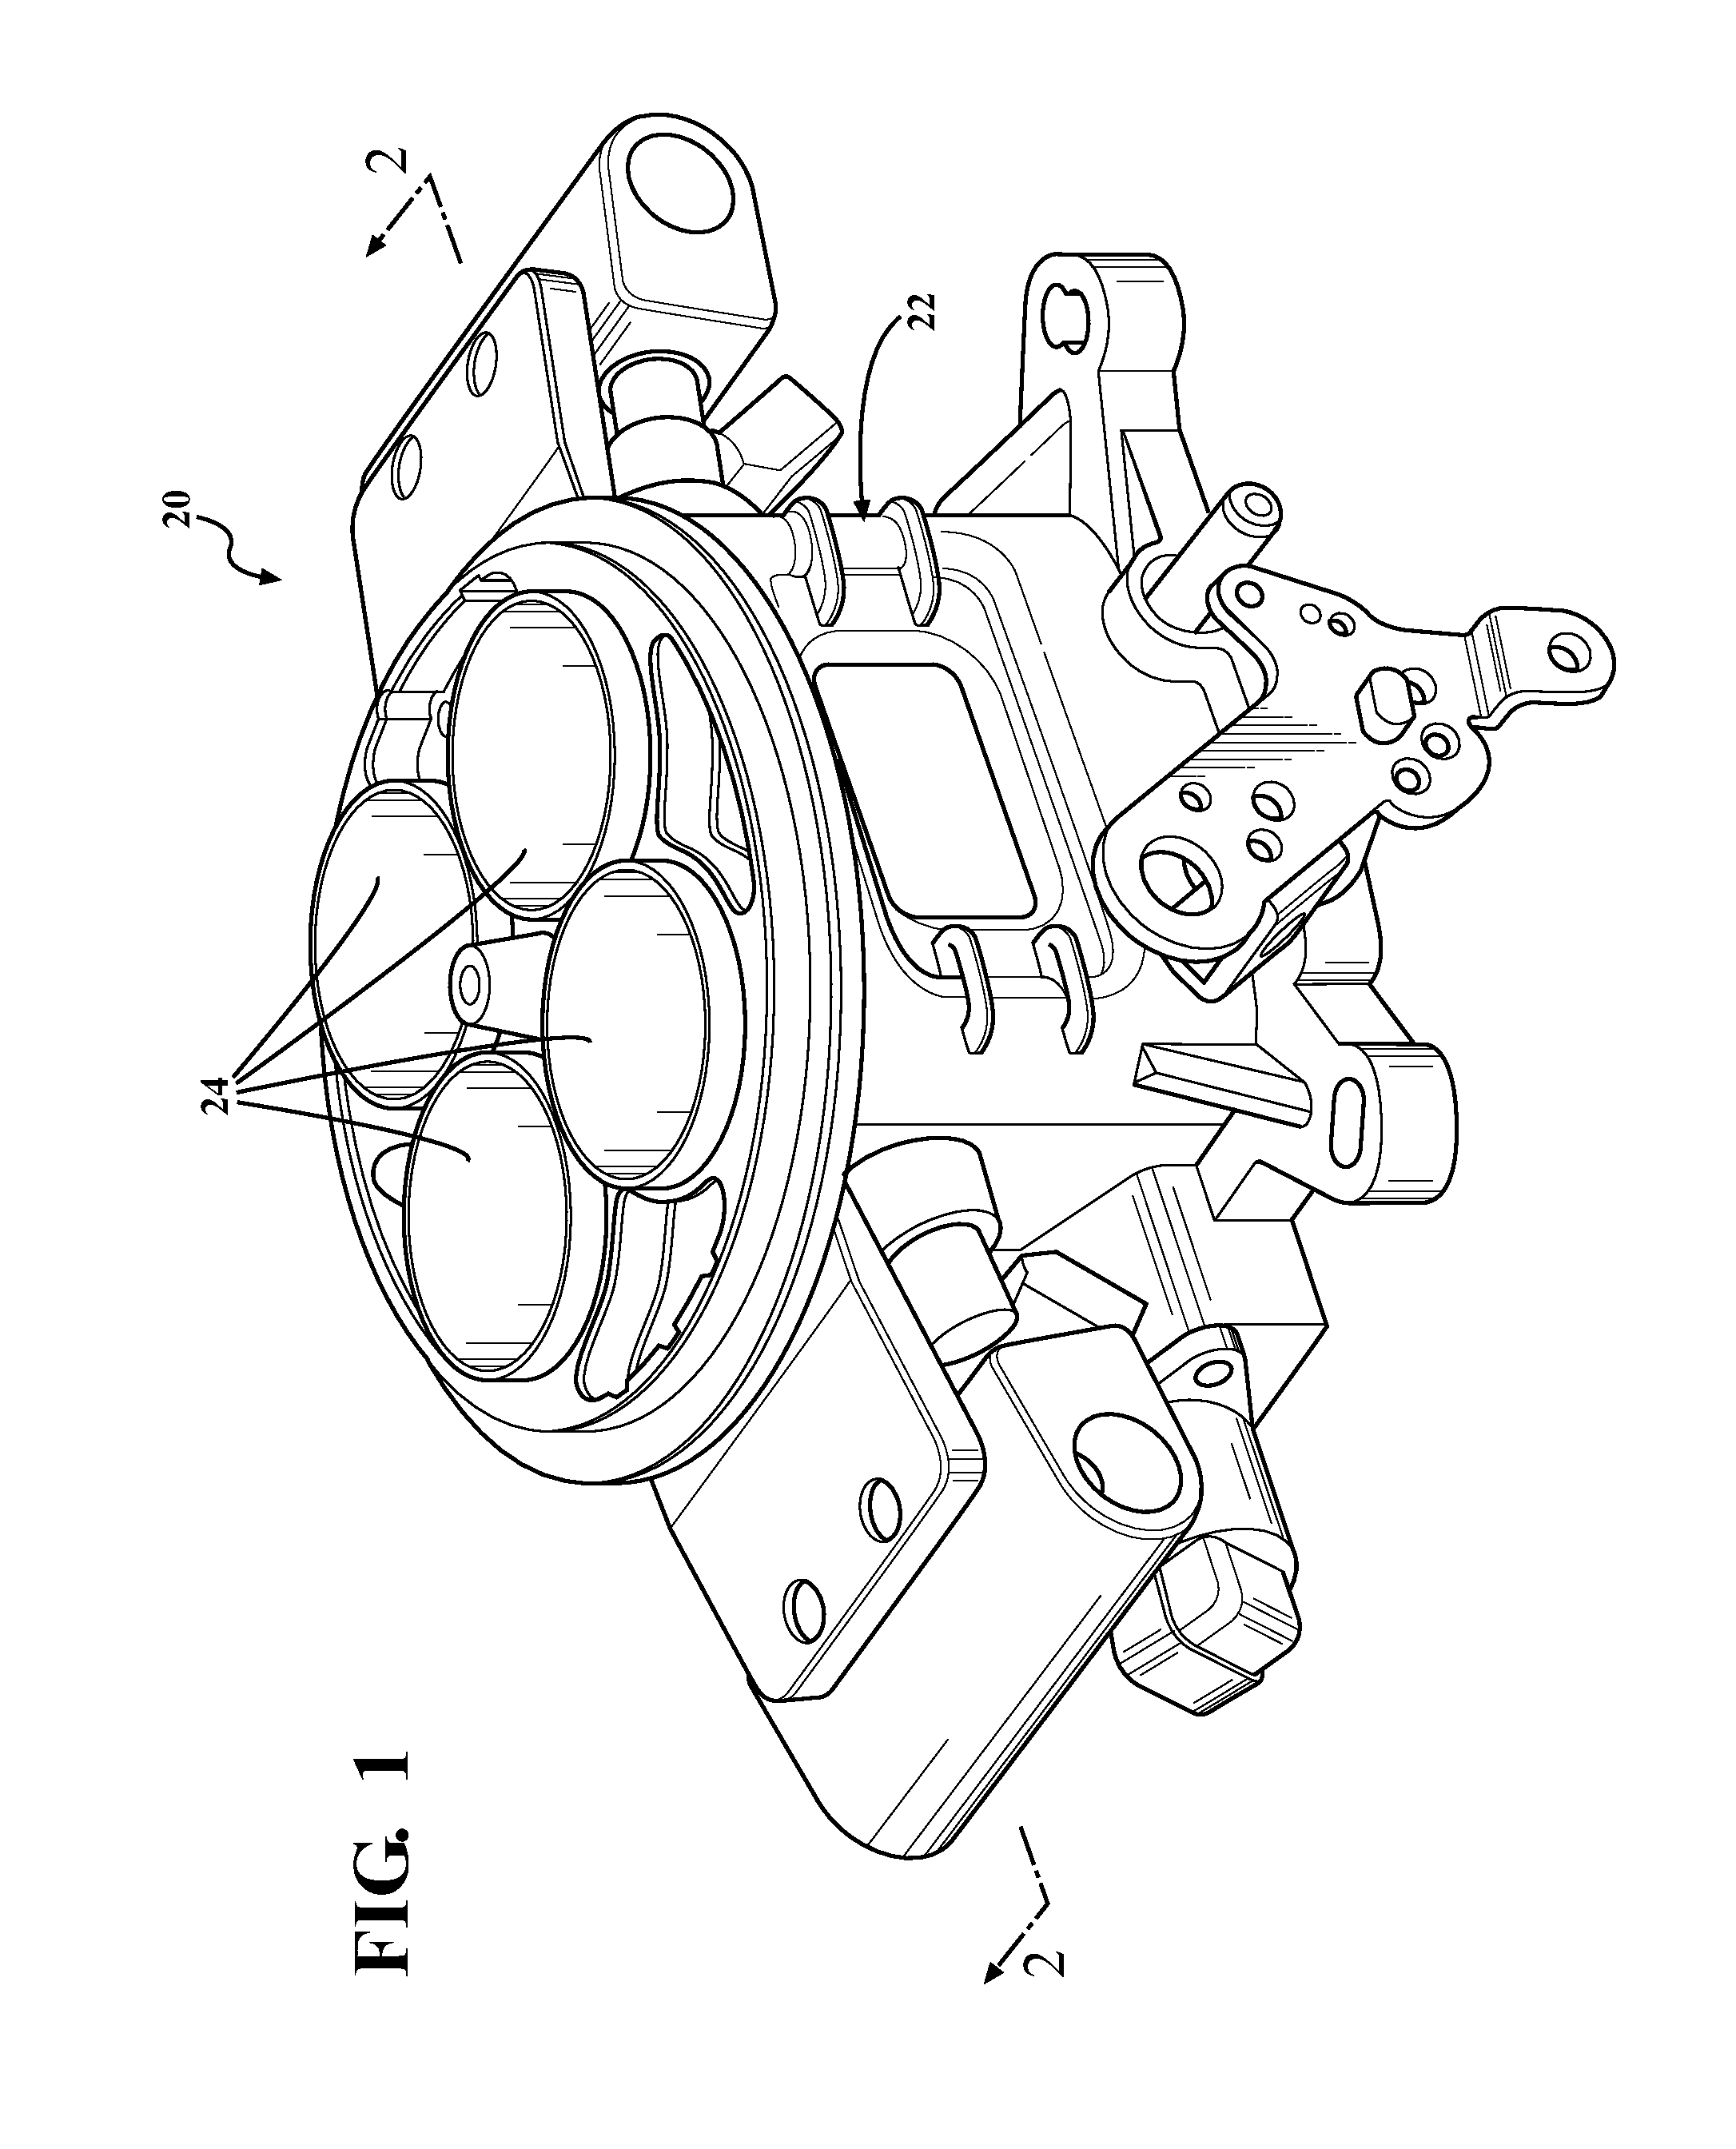 Hybrid carburetor and fuel injection assembly for an internal combustion engine